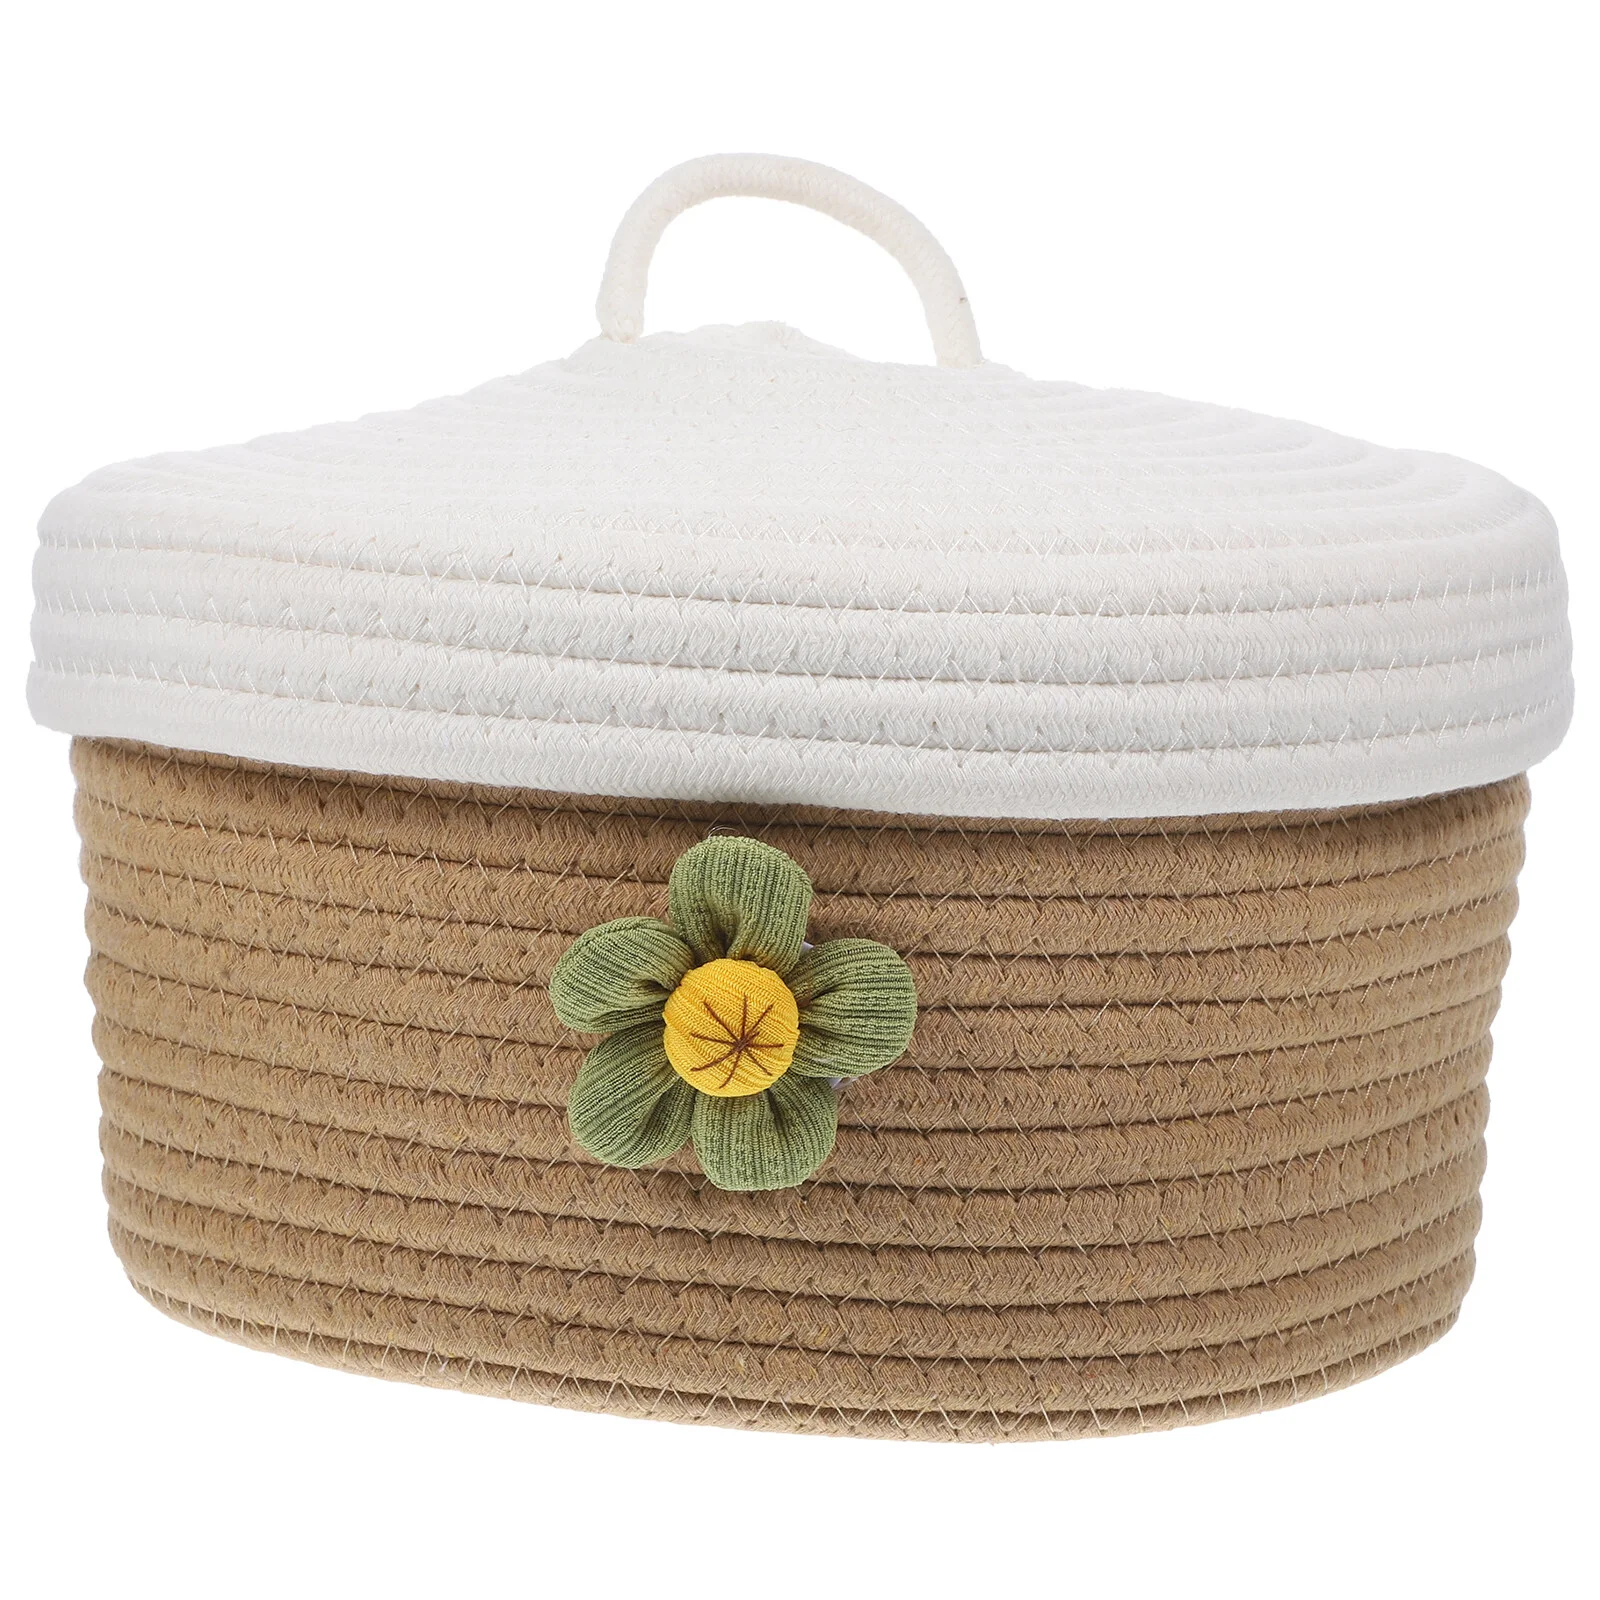 

Woven Woven Basket For Toys Toy Basket Sundry Storage Woven Rope Sundries Cotton Baskets Weaving Desktop Snack Lid